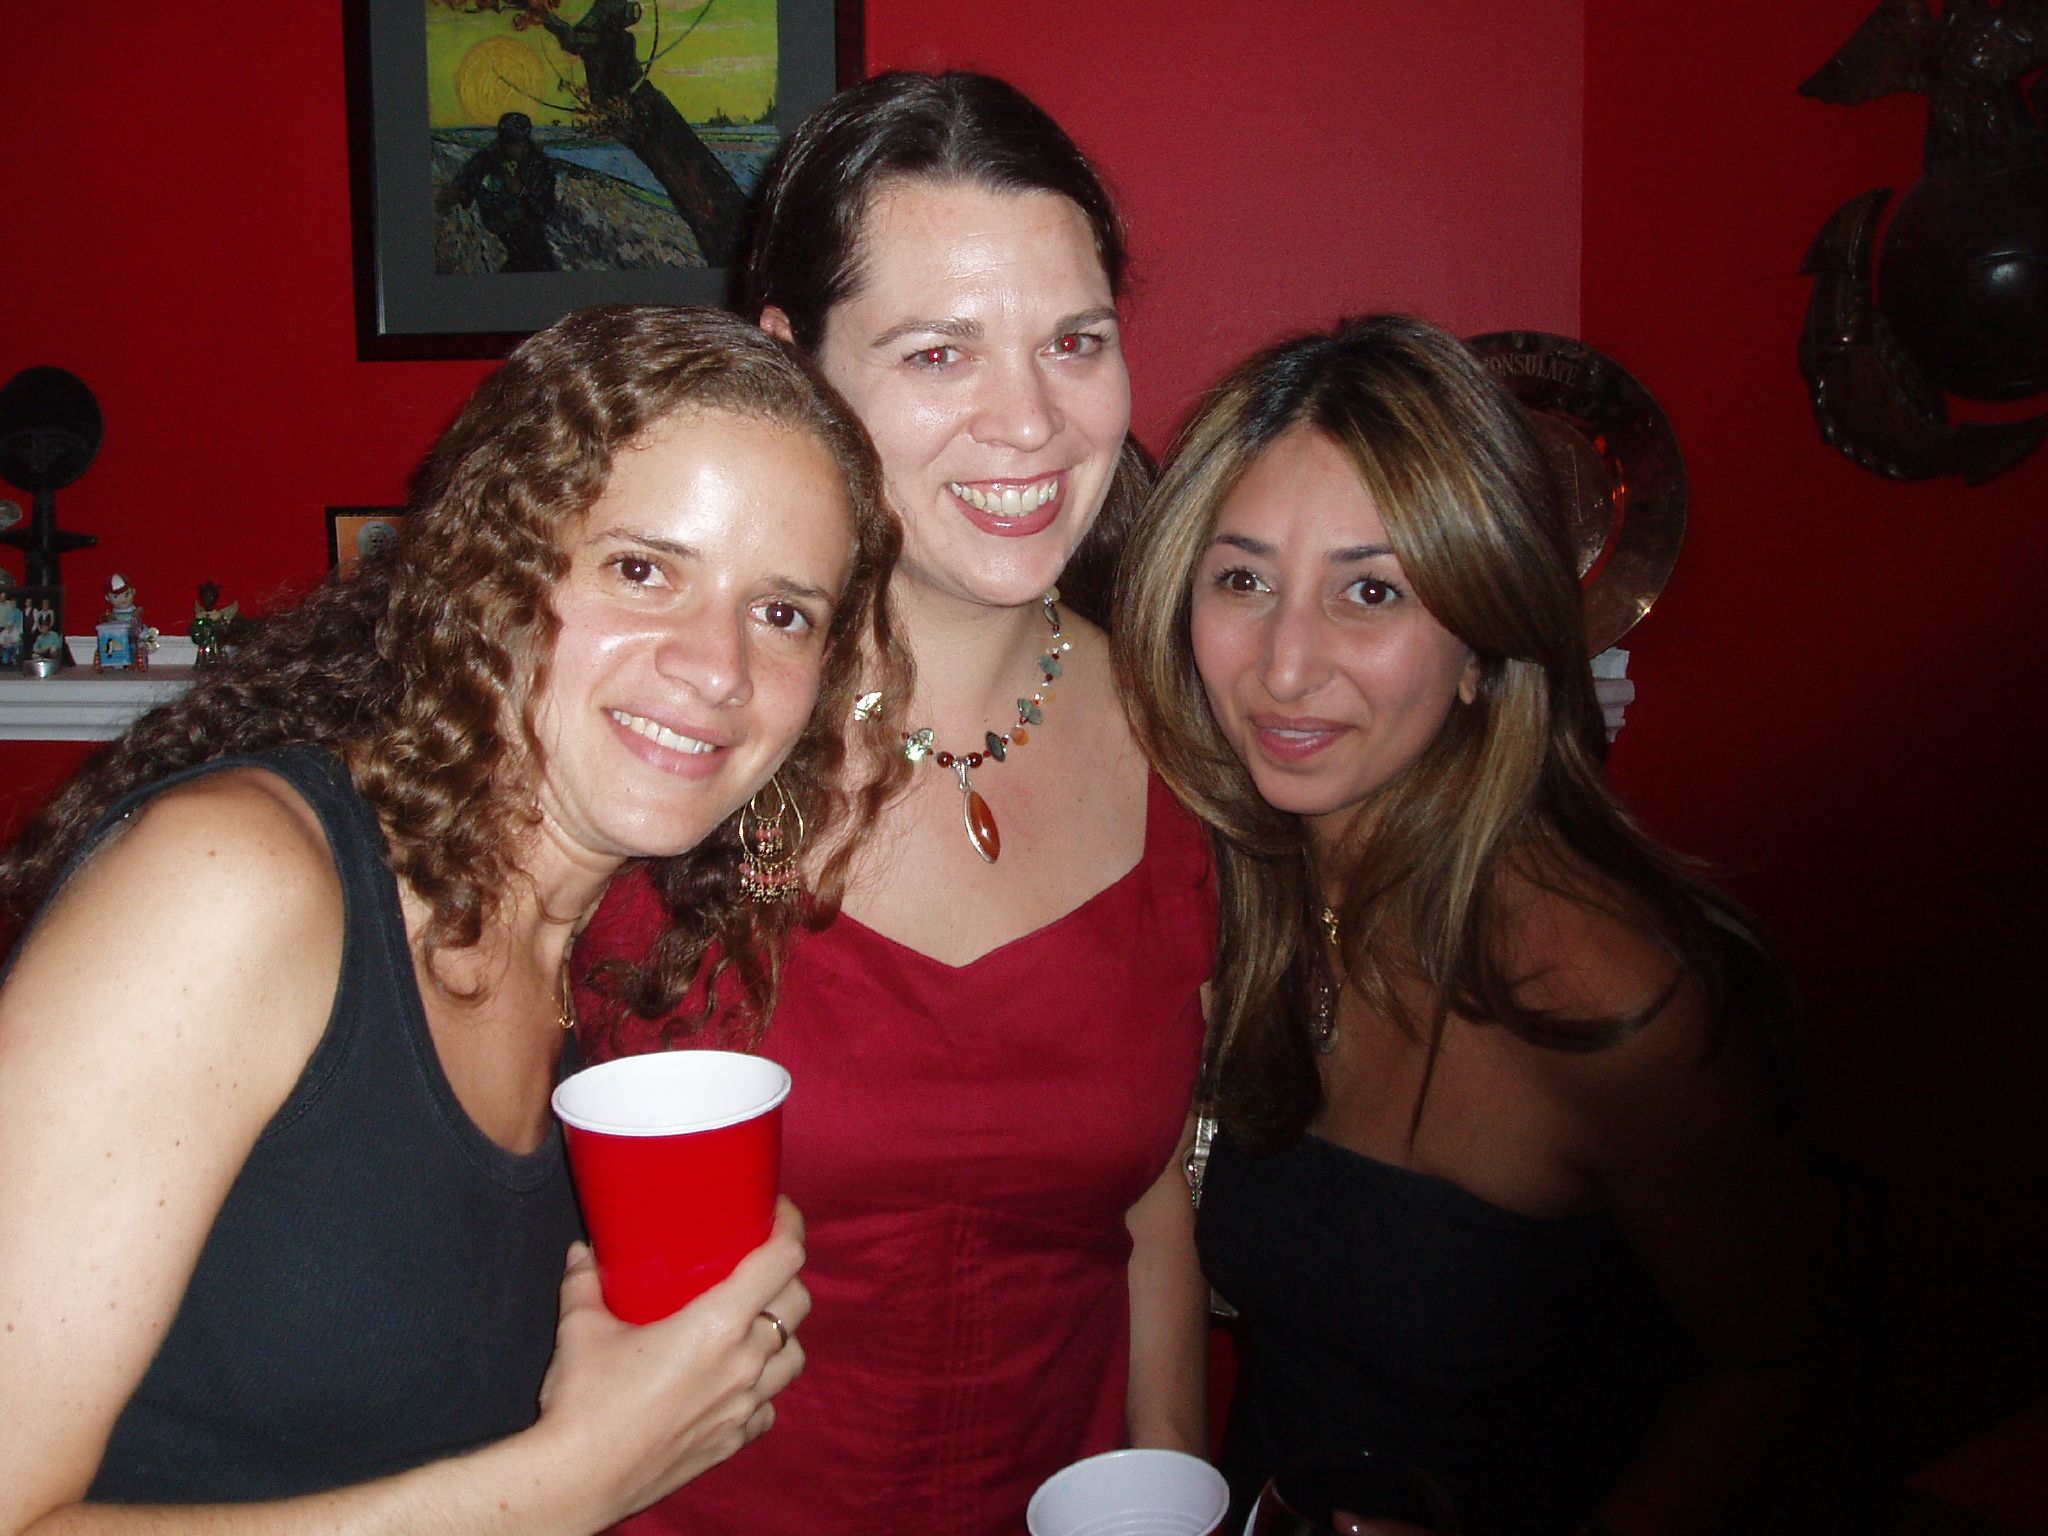 two women and a woman with drinks are posing for the camera